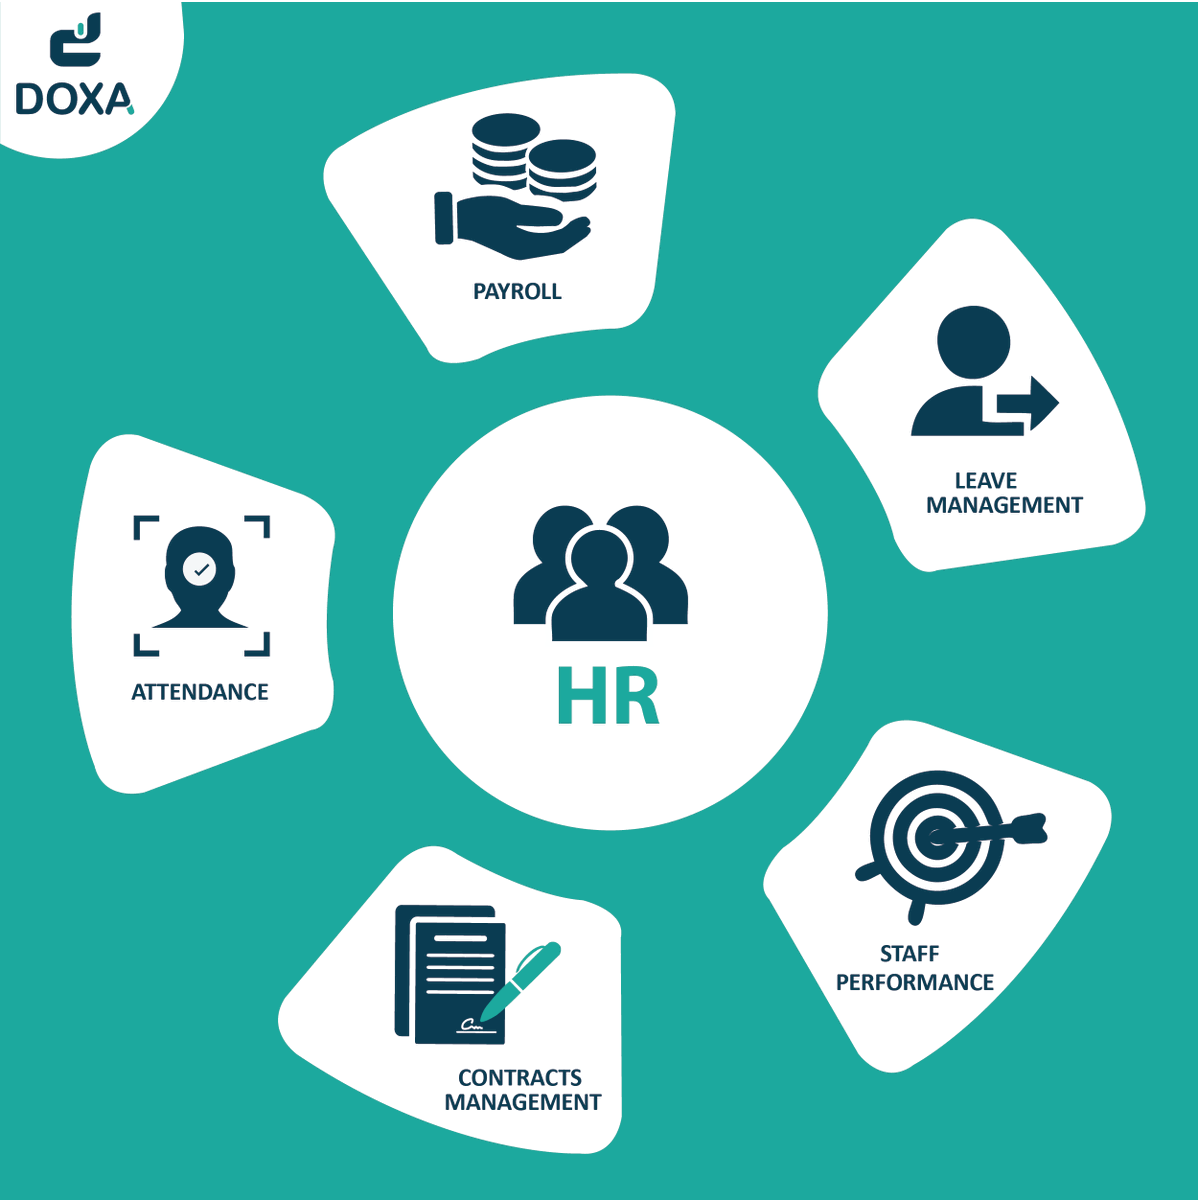 A tool you need to manage your #HR processes of 
#Payroll, #leaveManagement, #EmployeeAttendance, #FacialRecognition, #StaffProfiles, #recruitment, #contracts, #StaffPerformance, #Overtime, #RwOT #MadeinRwanda